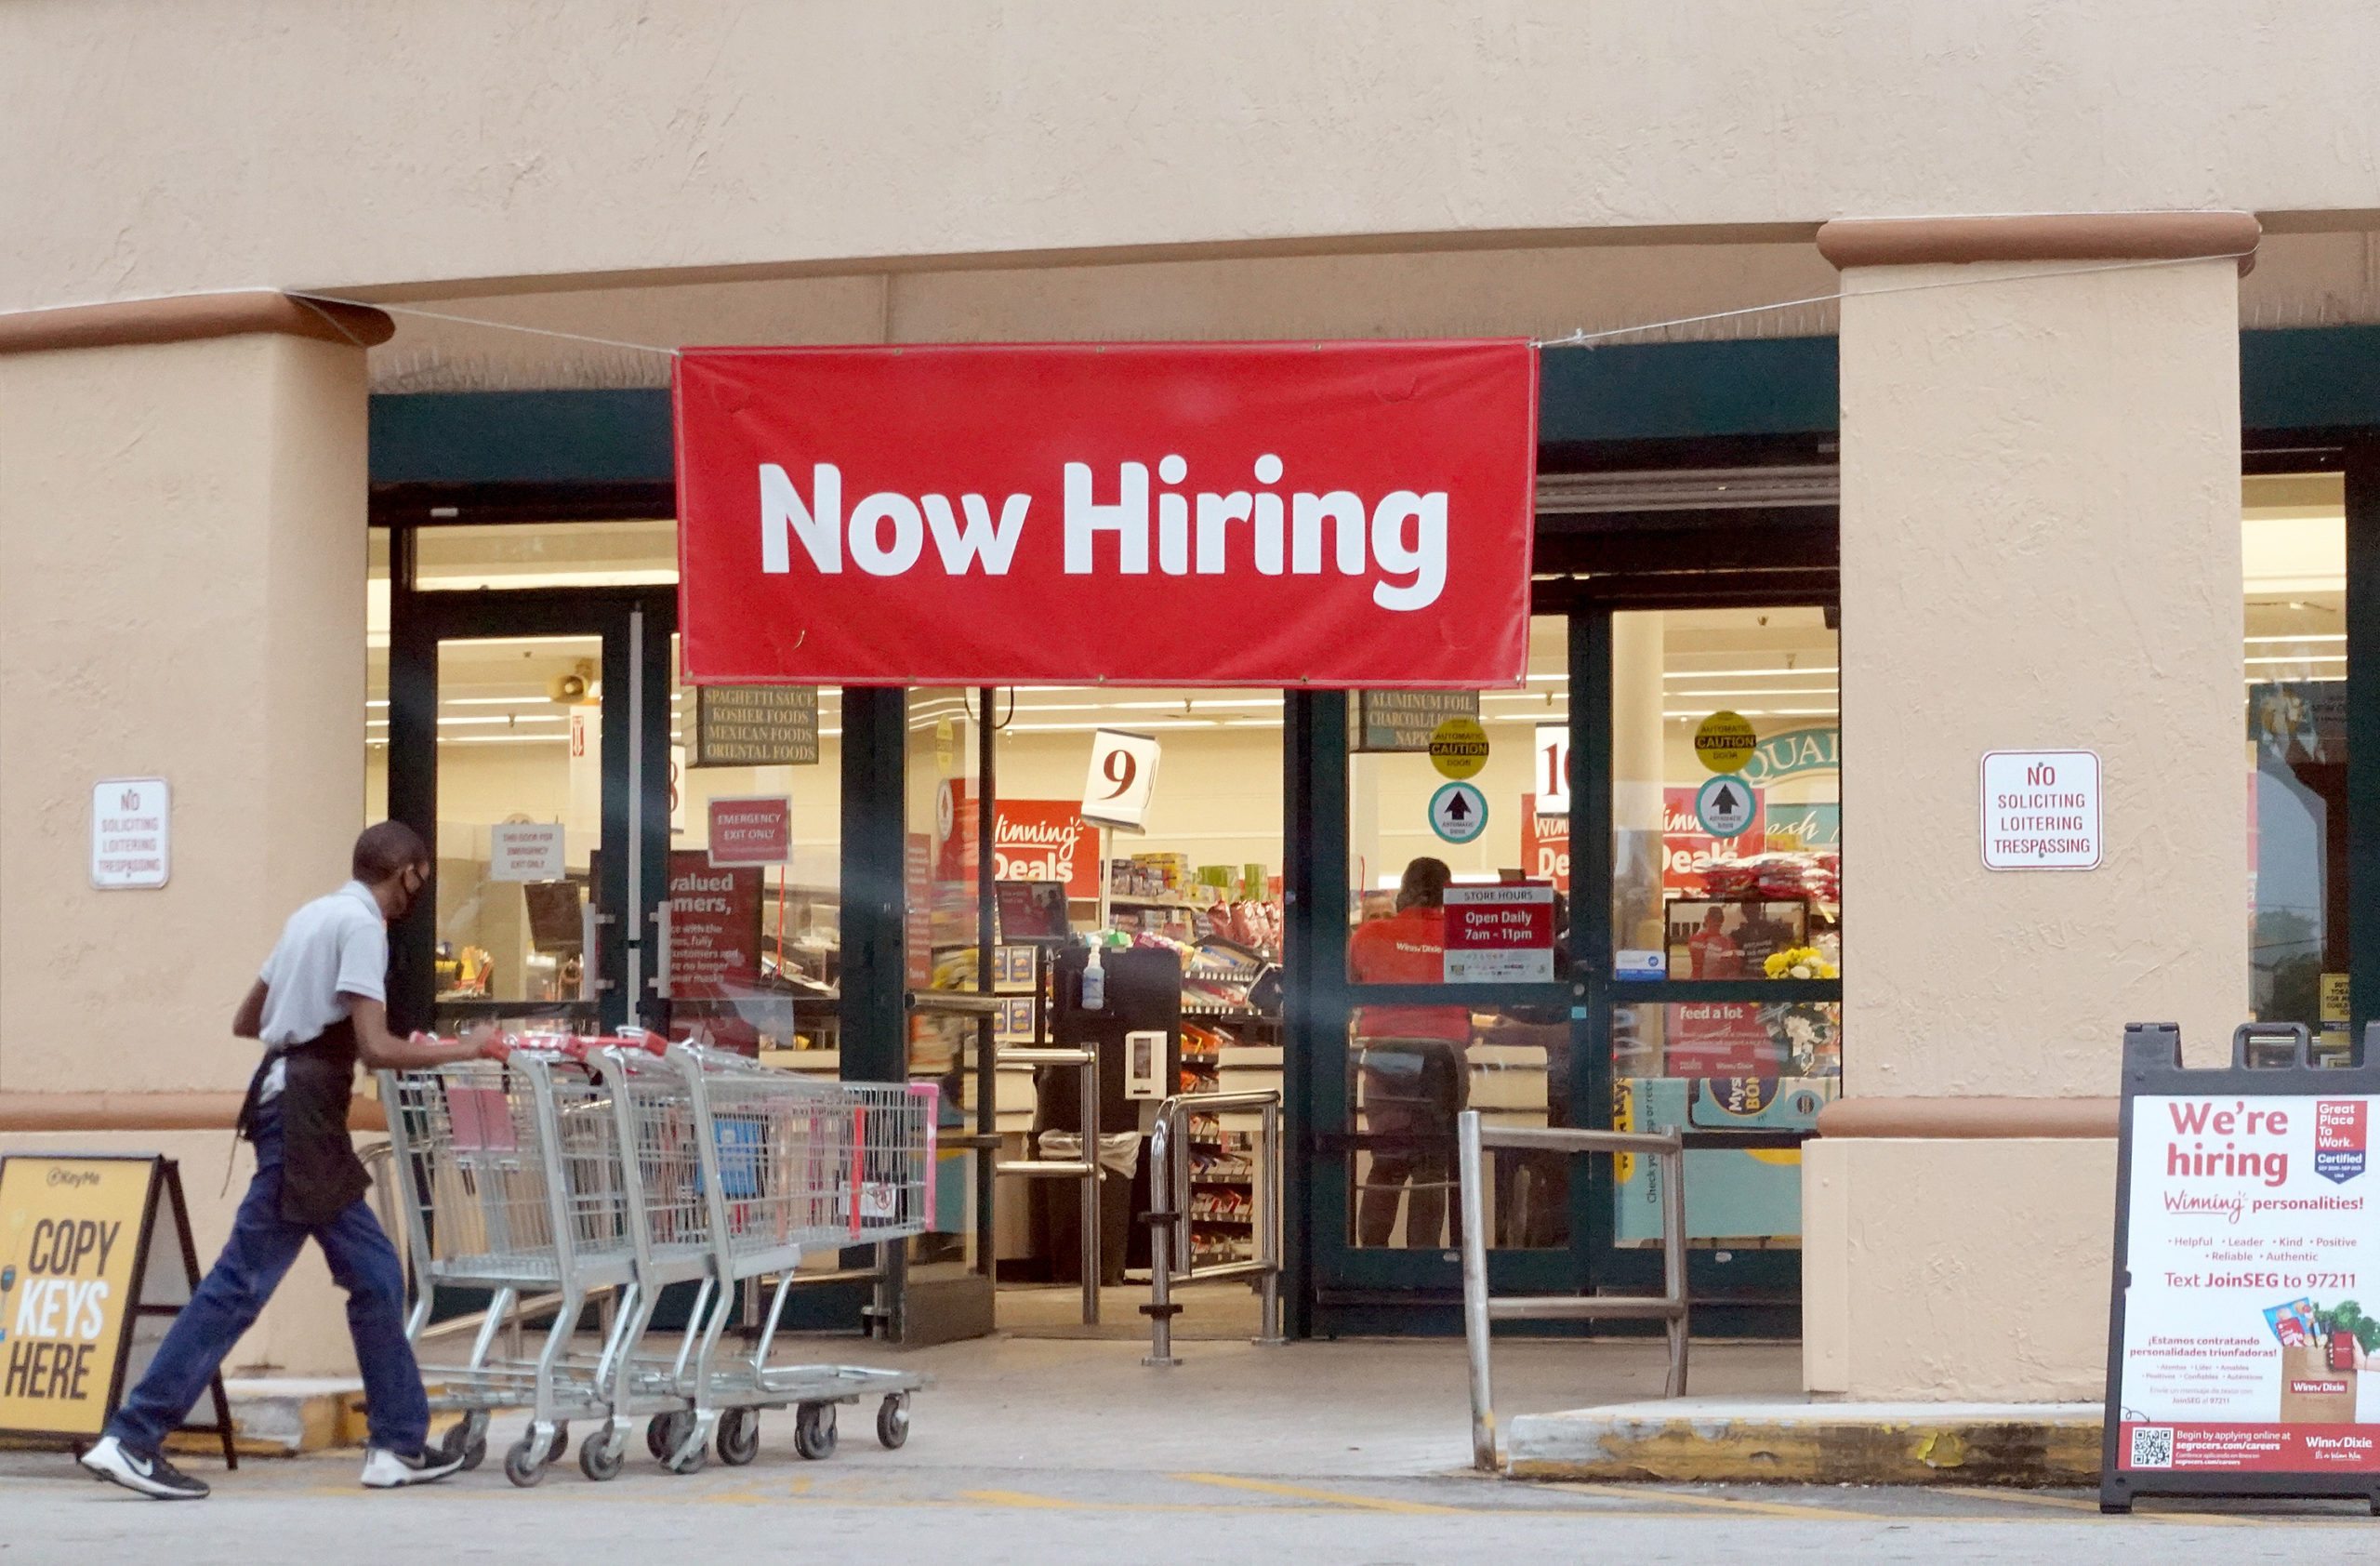 A "now hiring" sign hangs near the entrance of a Winn-Dixie Supermarket on Tuesday in Hallandale, Florida. (Joe Raedle/Getty Images)